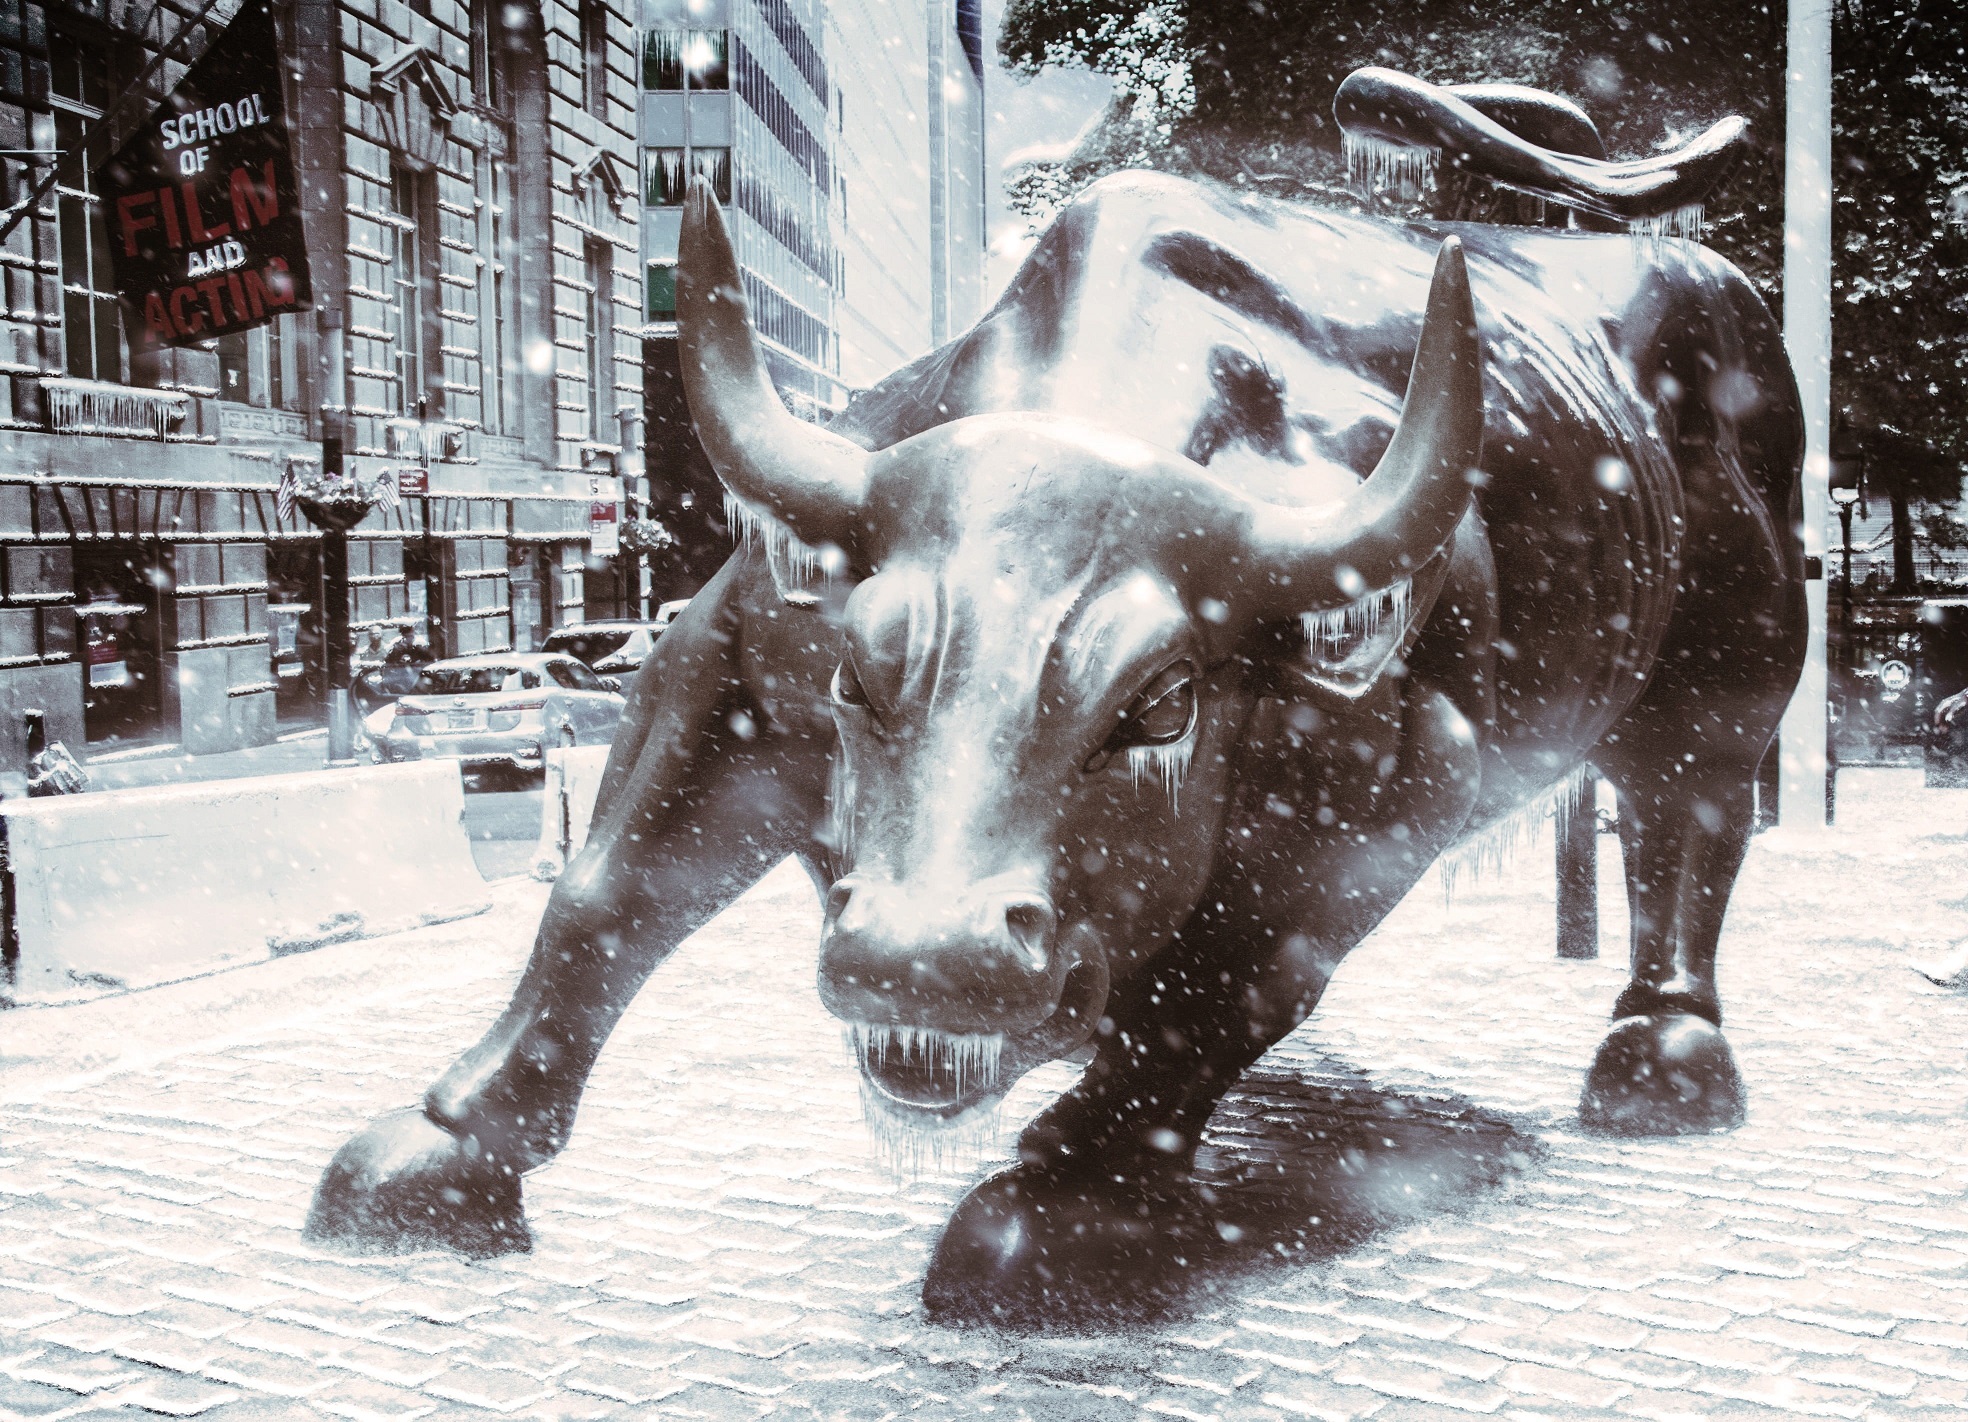 Charging Bull in the cold winter time